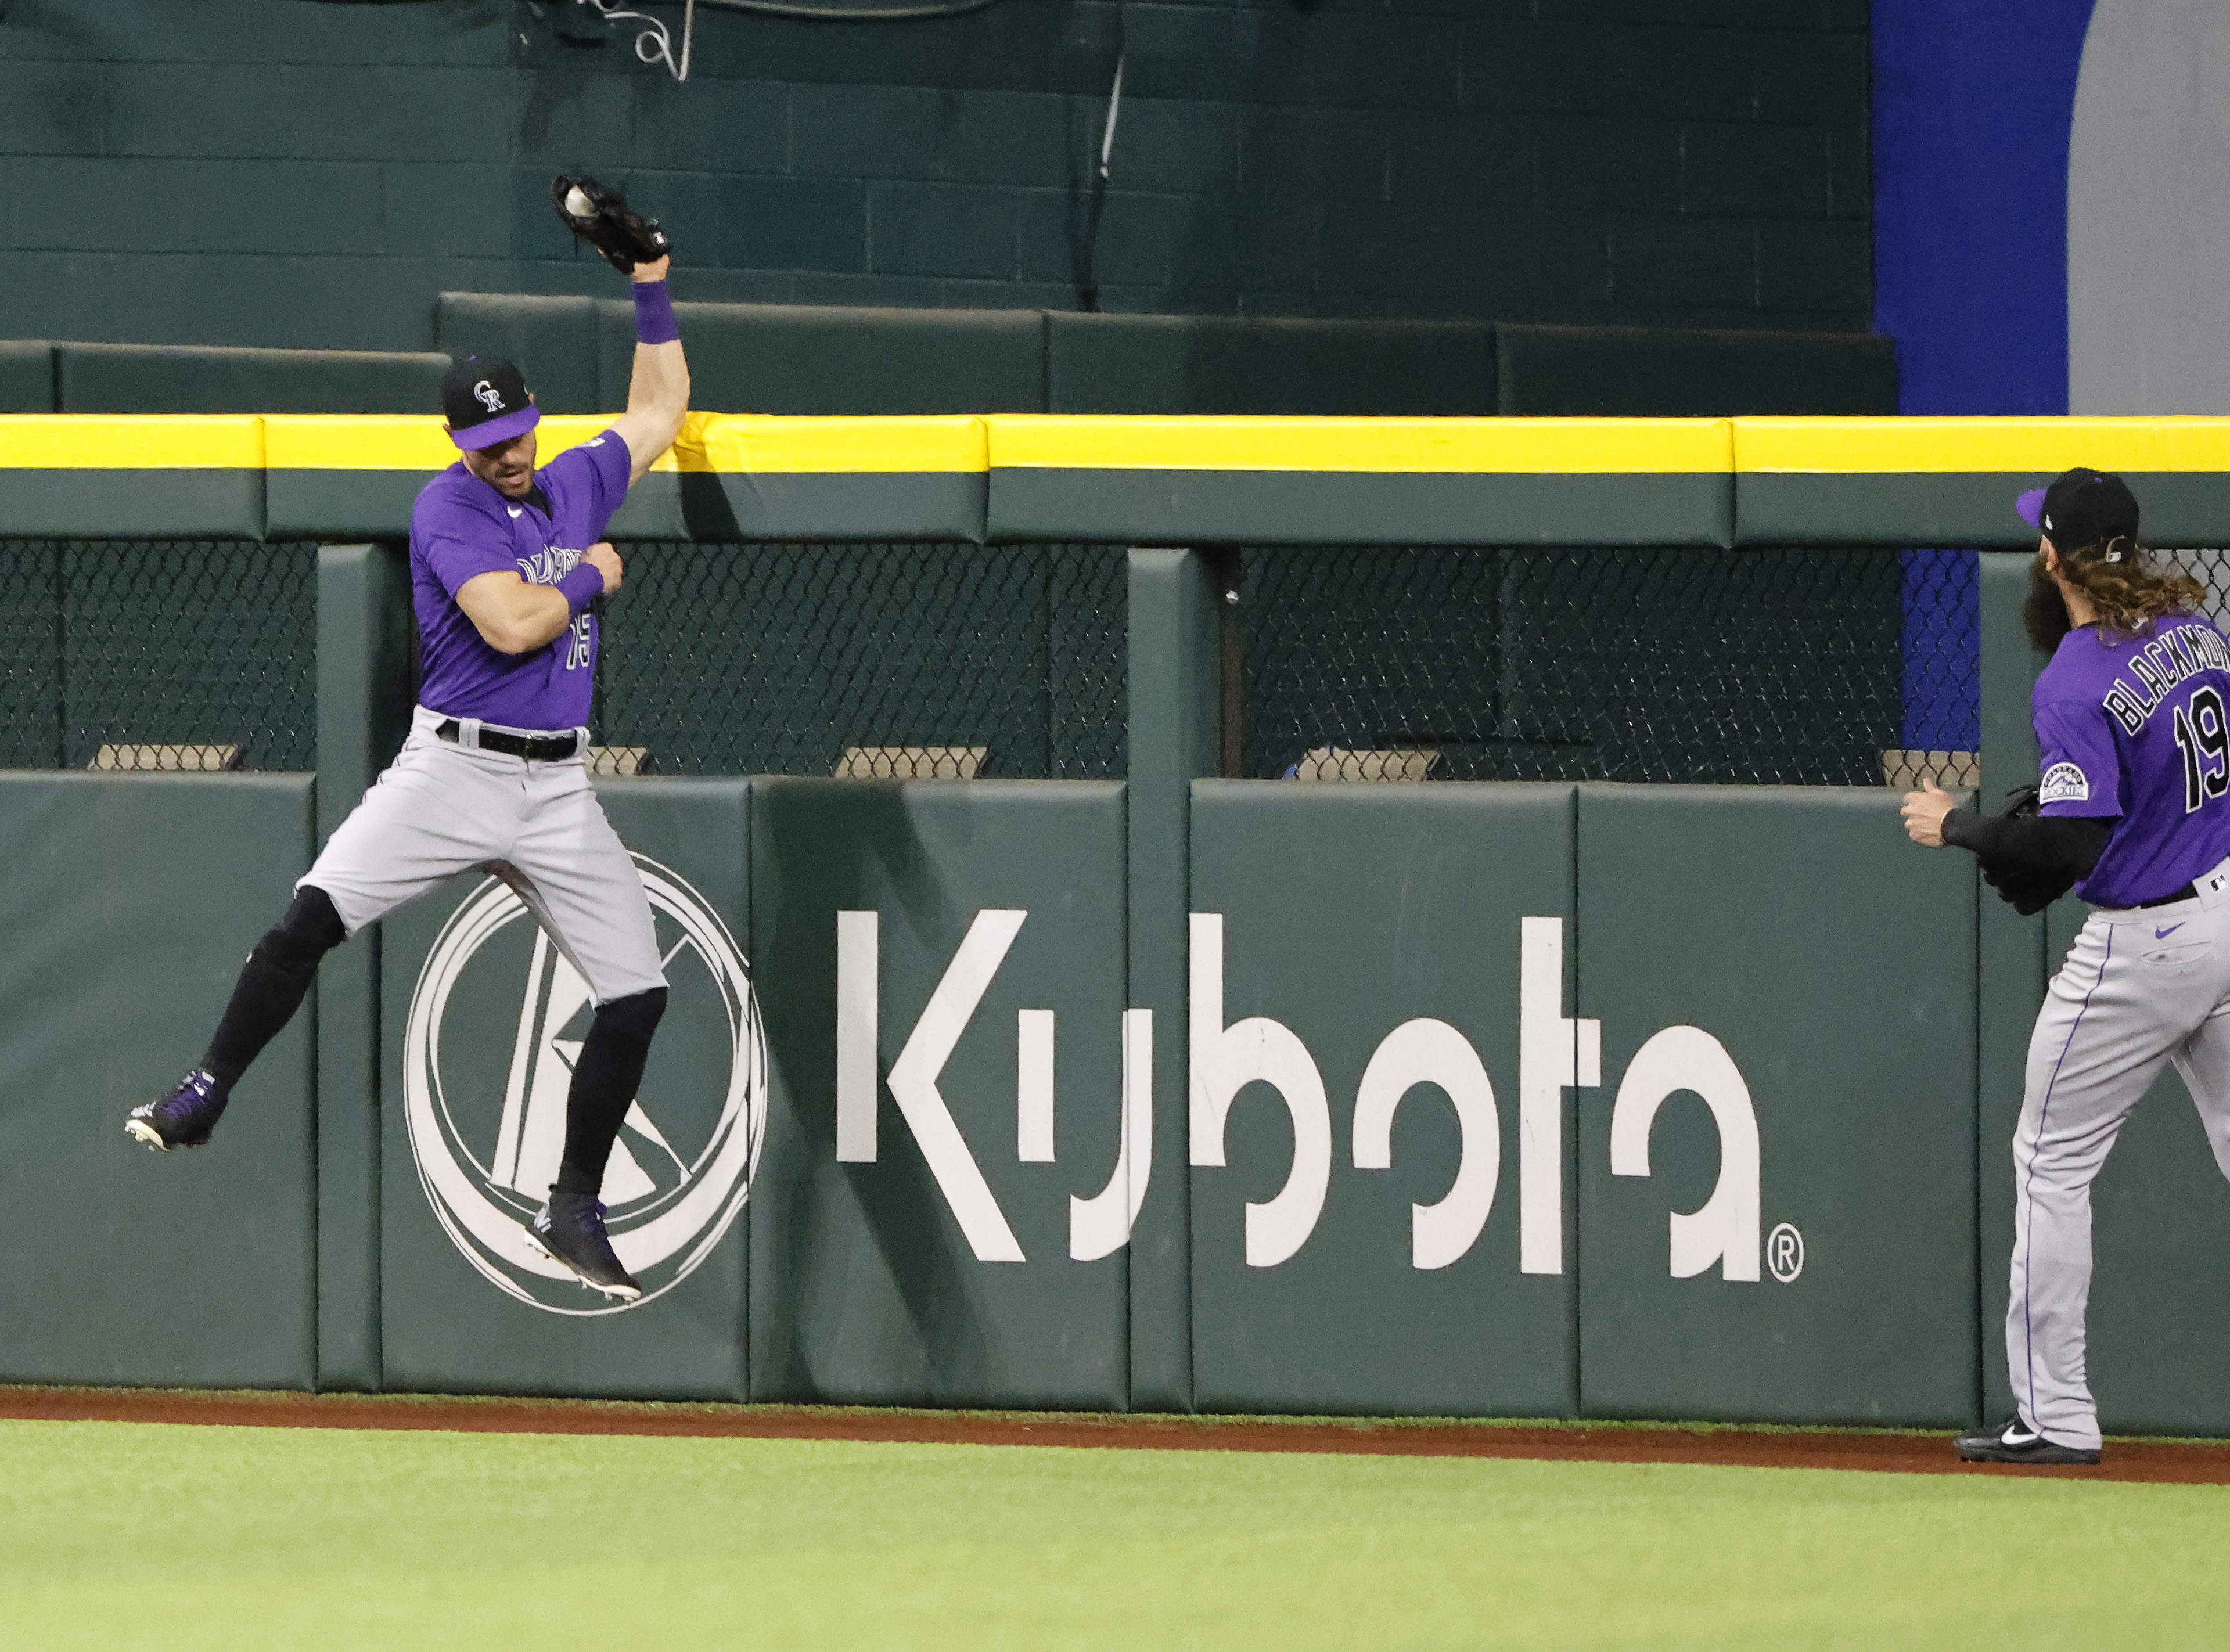 Randal Grichuk of the Colorado Rockies makes a leaping catch above the centerfield wall for a deep ball off the bat of Corey Seager of the Texas Rangers to end the fifth inning at Globe Life Field on April 12, 2022 in Arlington, Texas.